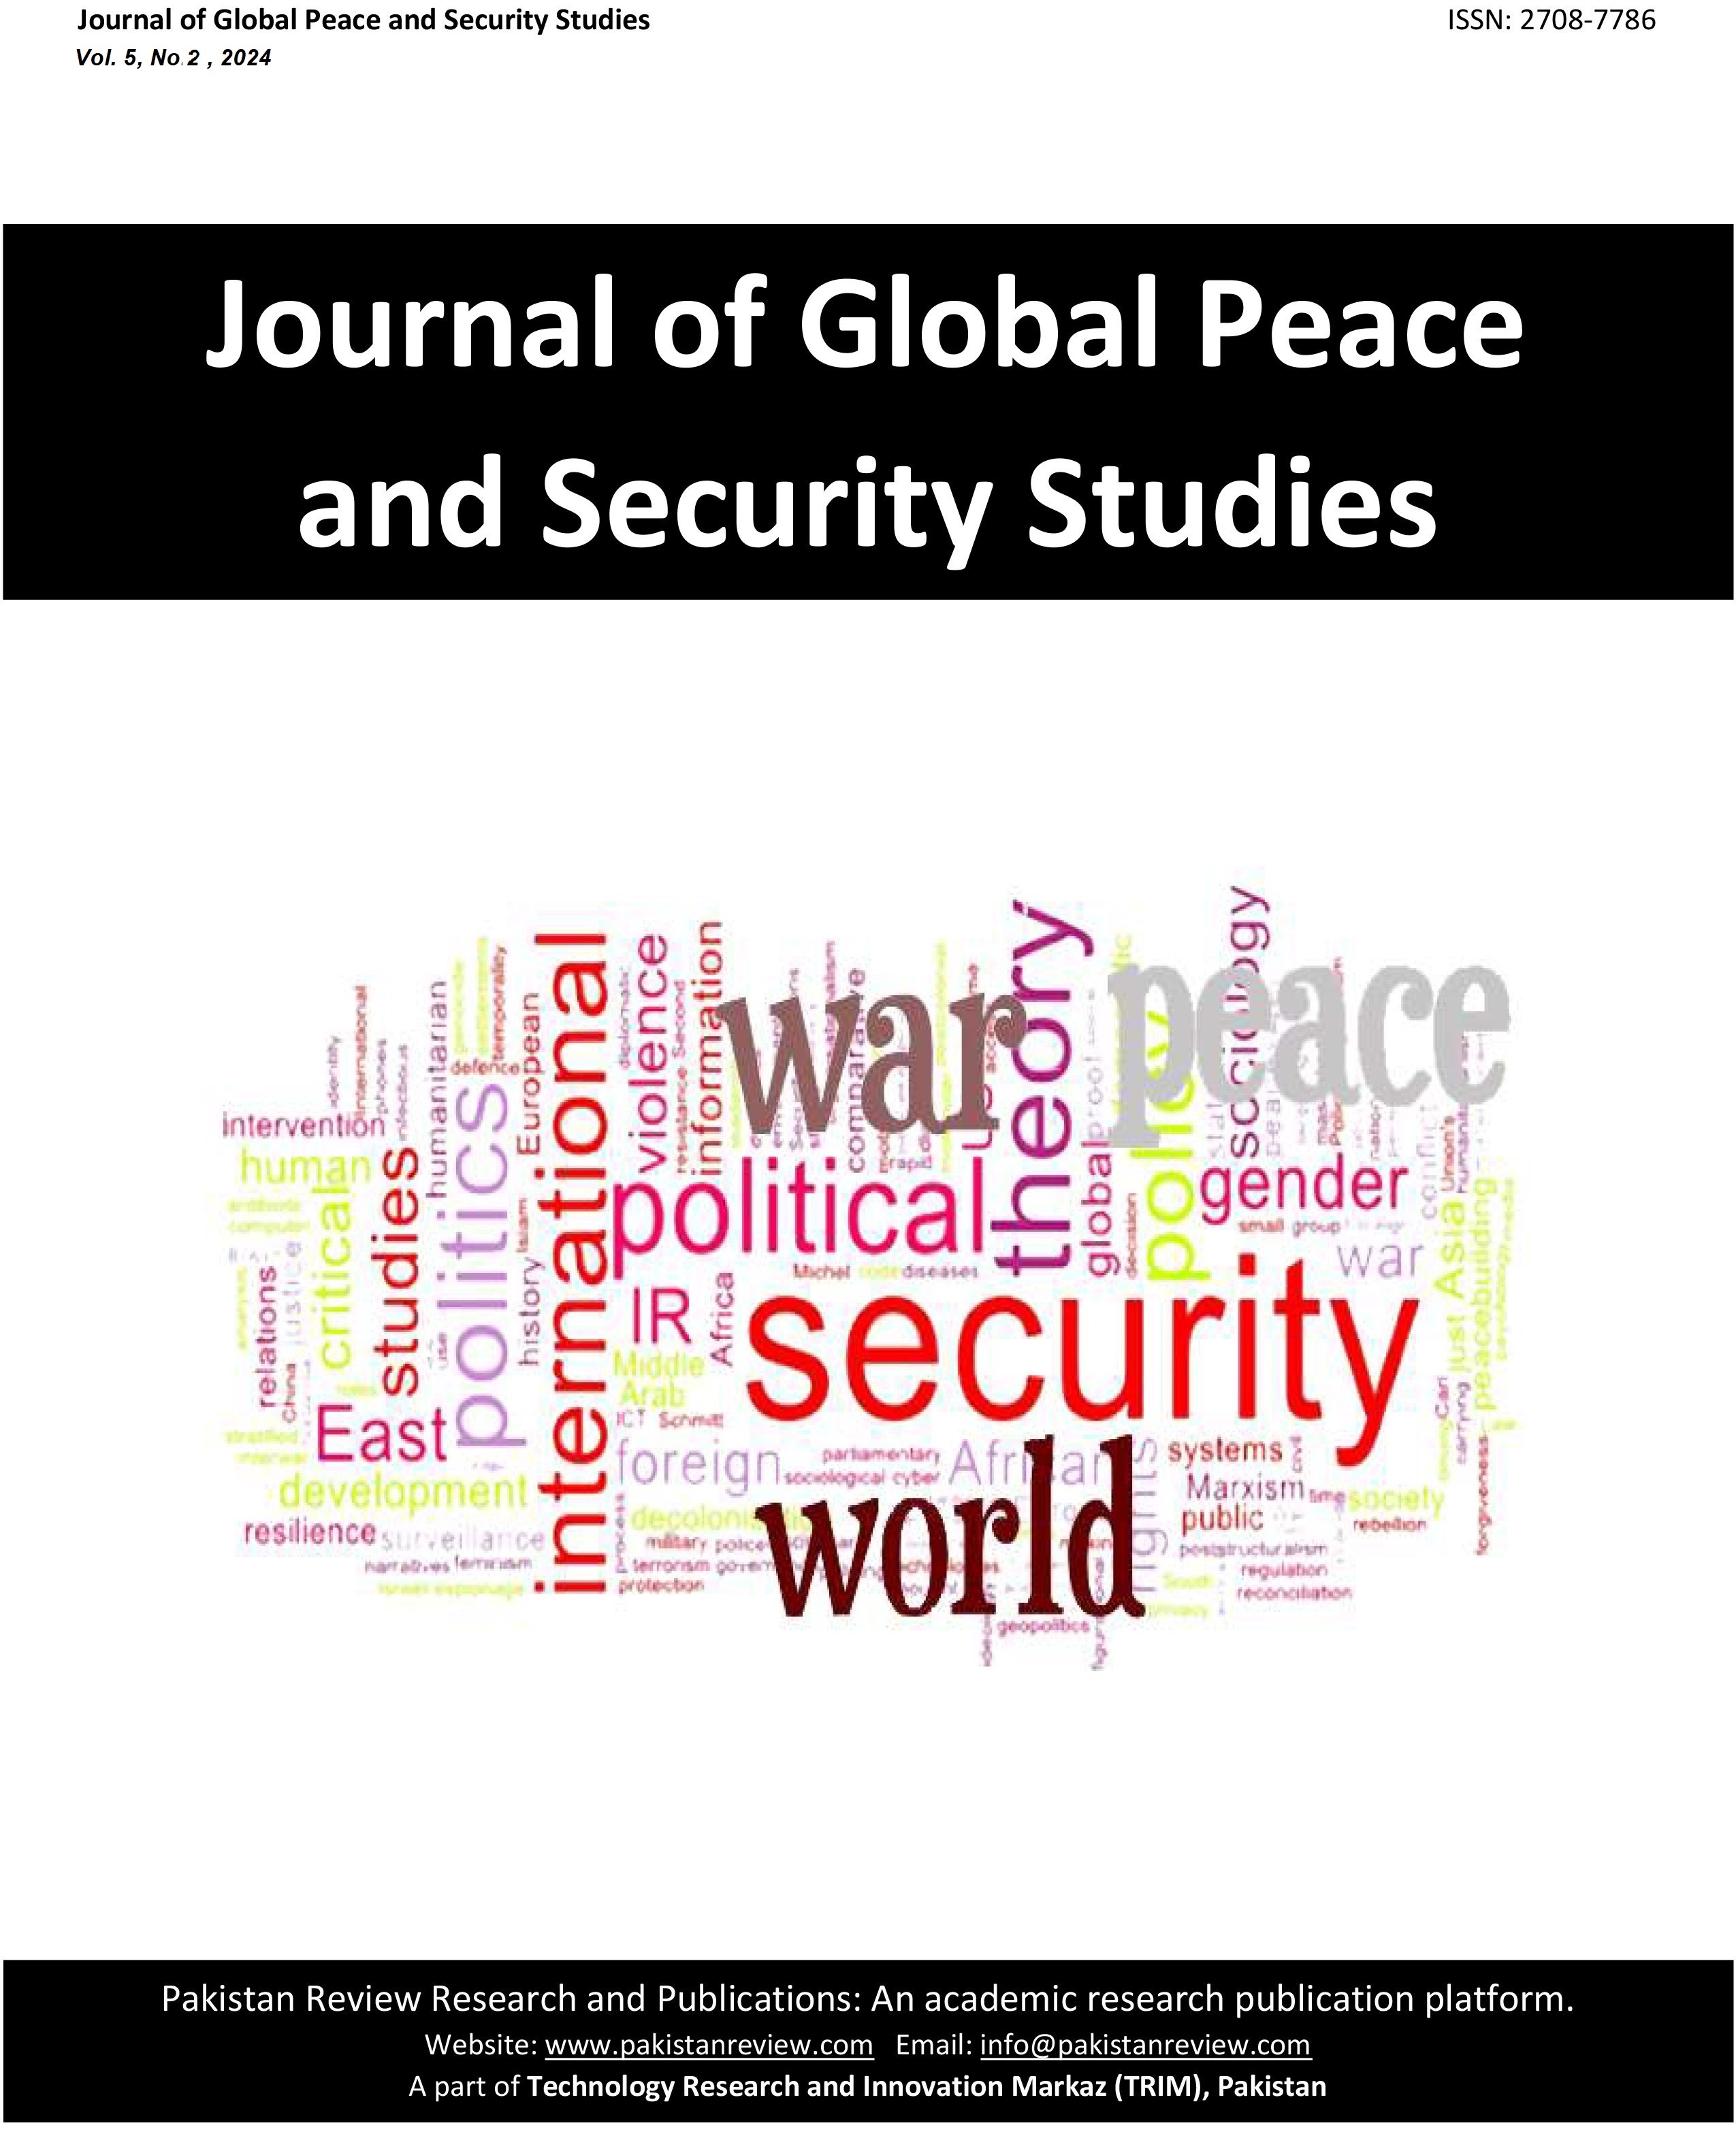 					View Vol. 5 No. 2 (2024): Journal of Global Peace and Security Studies (JGPSS)
				